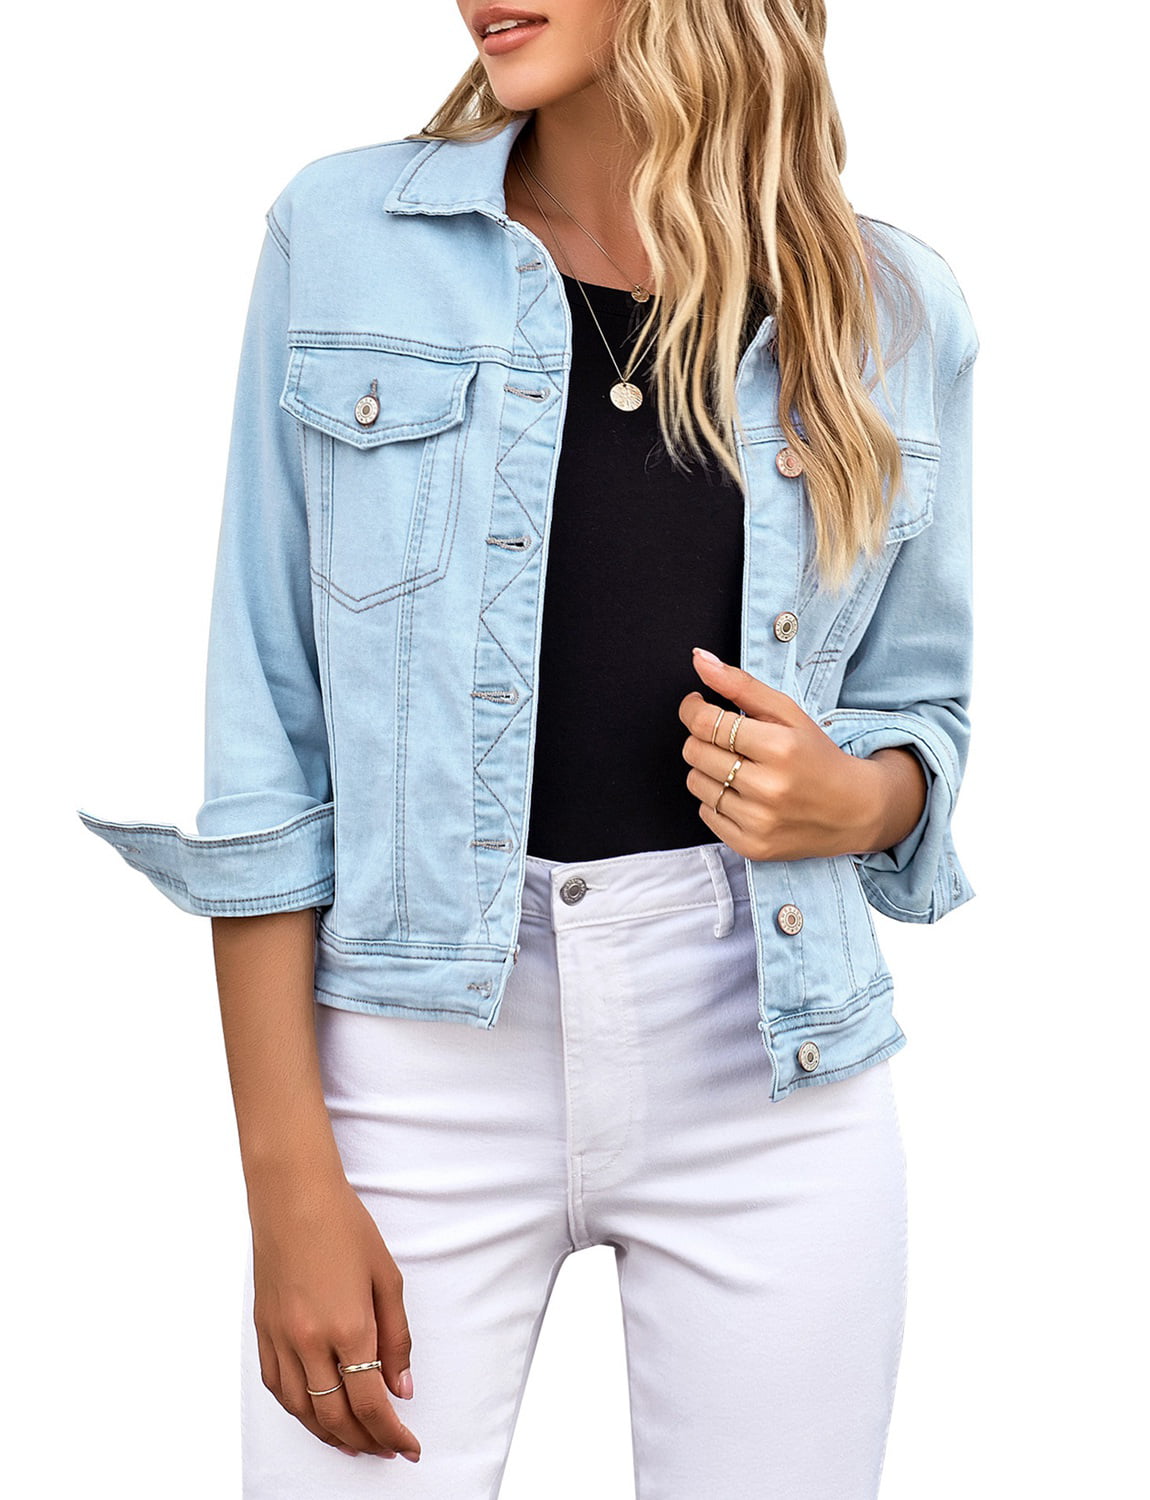 Women's Basic Long Sleeves Button Down Fitted Denim Jean Jackets – Lookbook  Store